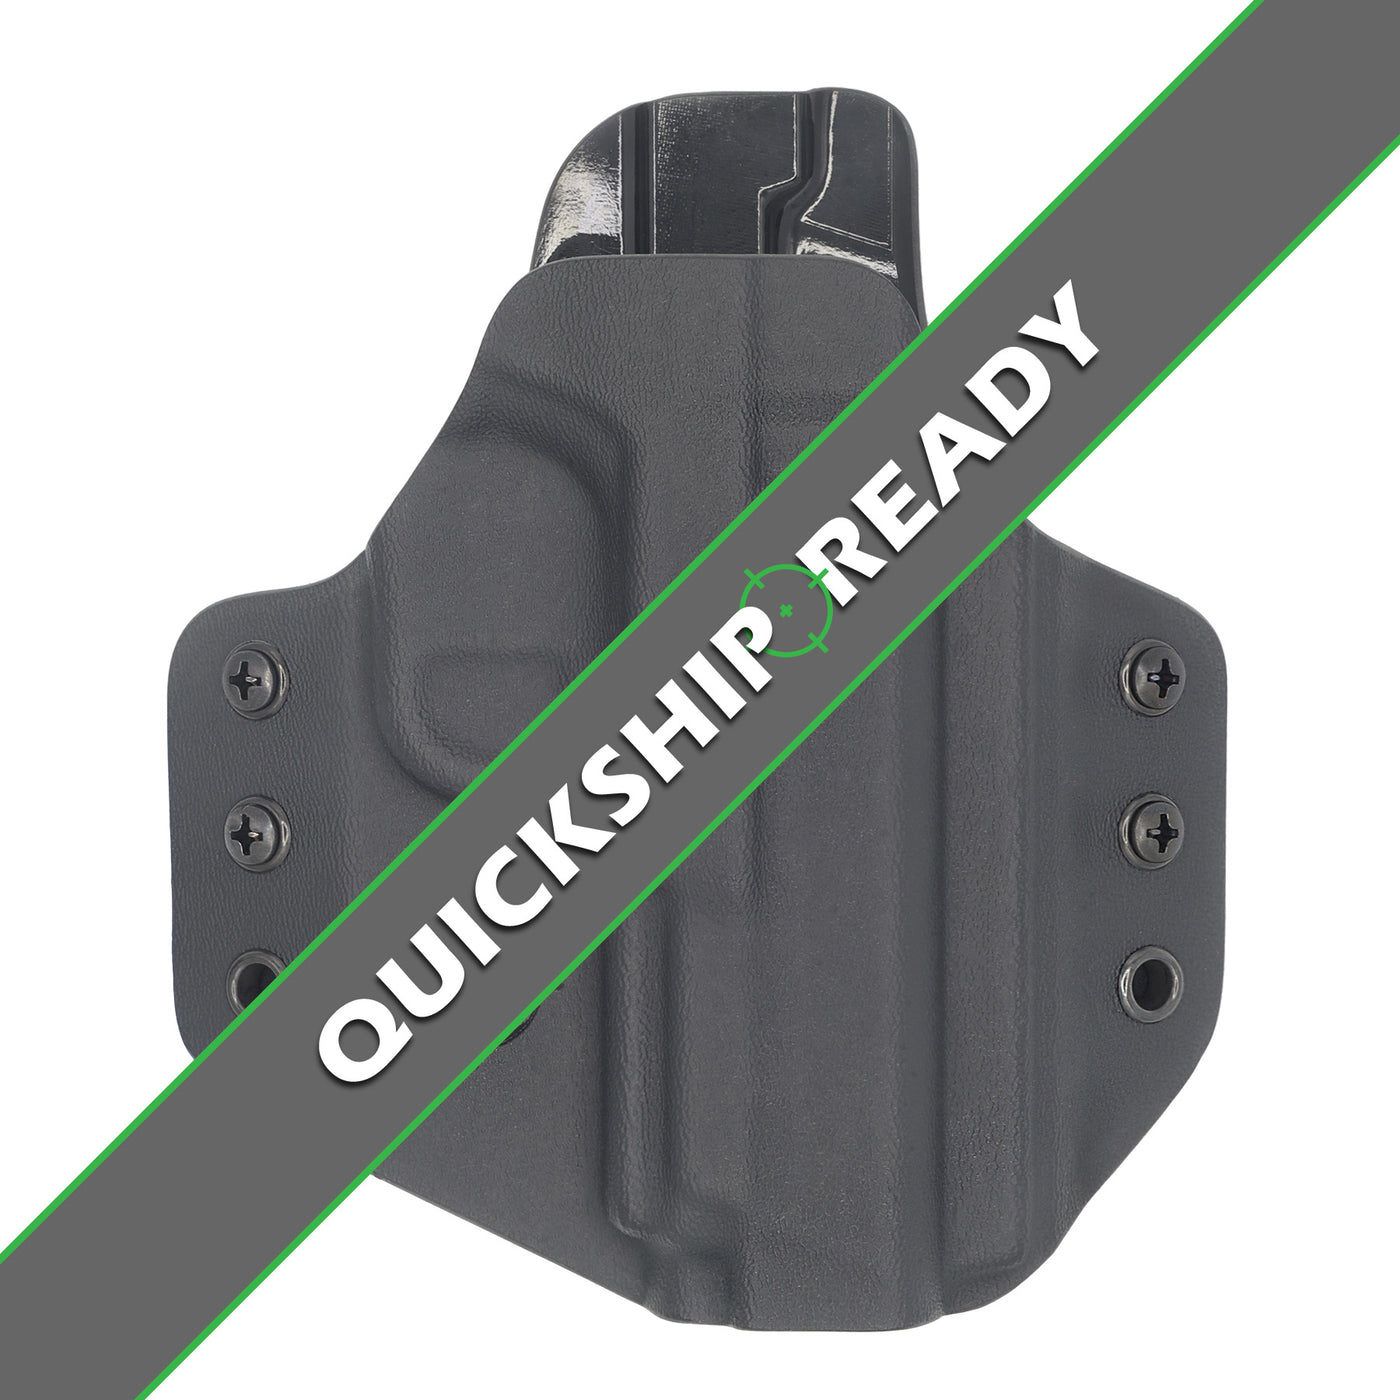 This is a C&G Holsters quickship Covert series Outside the Waistband Smith & Wesson M&P Shield 9EZ without the firearm showing a front view.